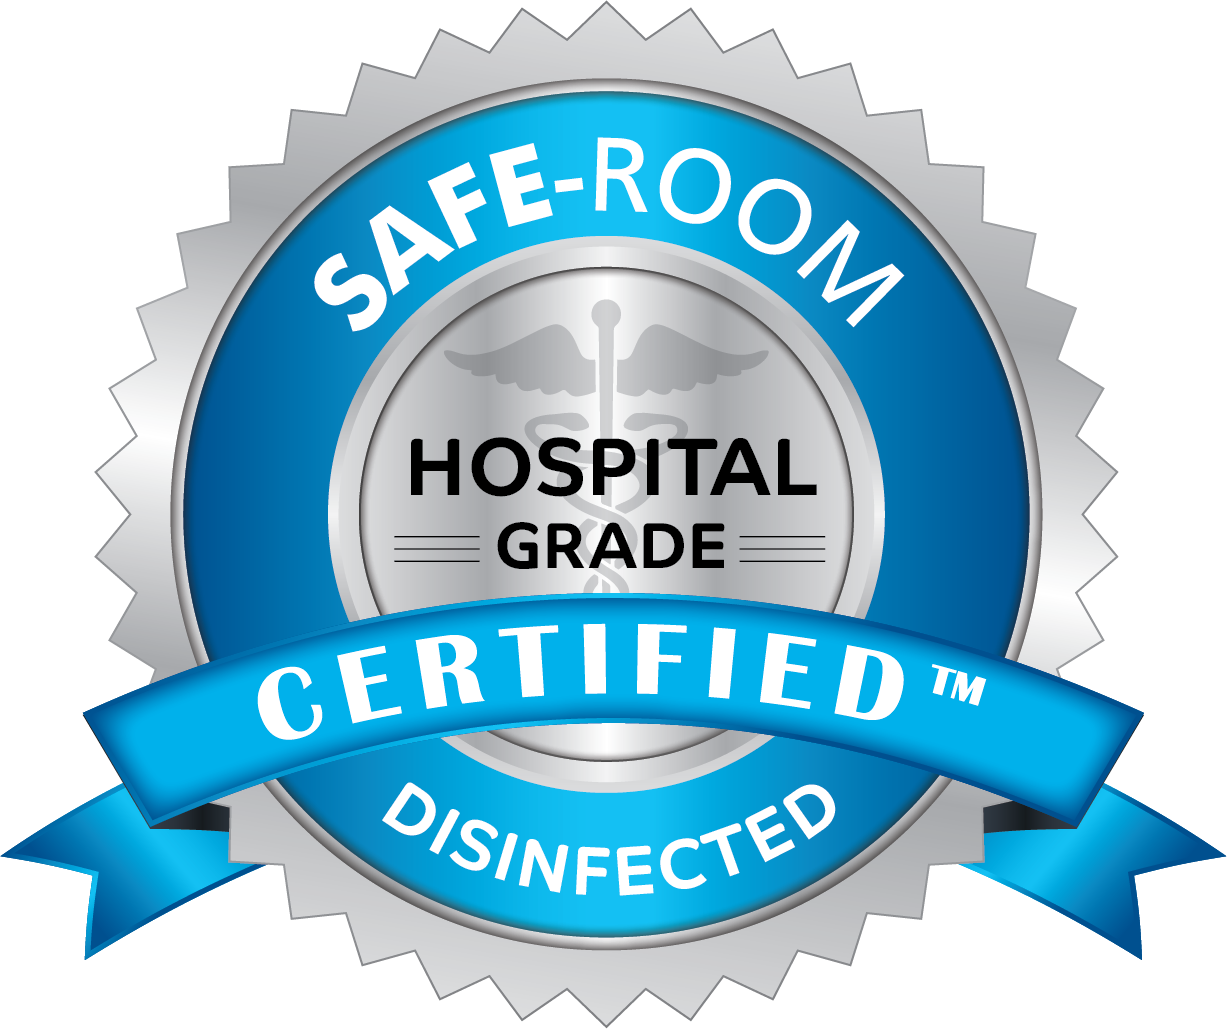 Hotel and Cruise Line Guests Can Now "Break the Seal" and Stay with Confidence with SAFE-ROOM CERTIFIED(TM)